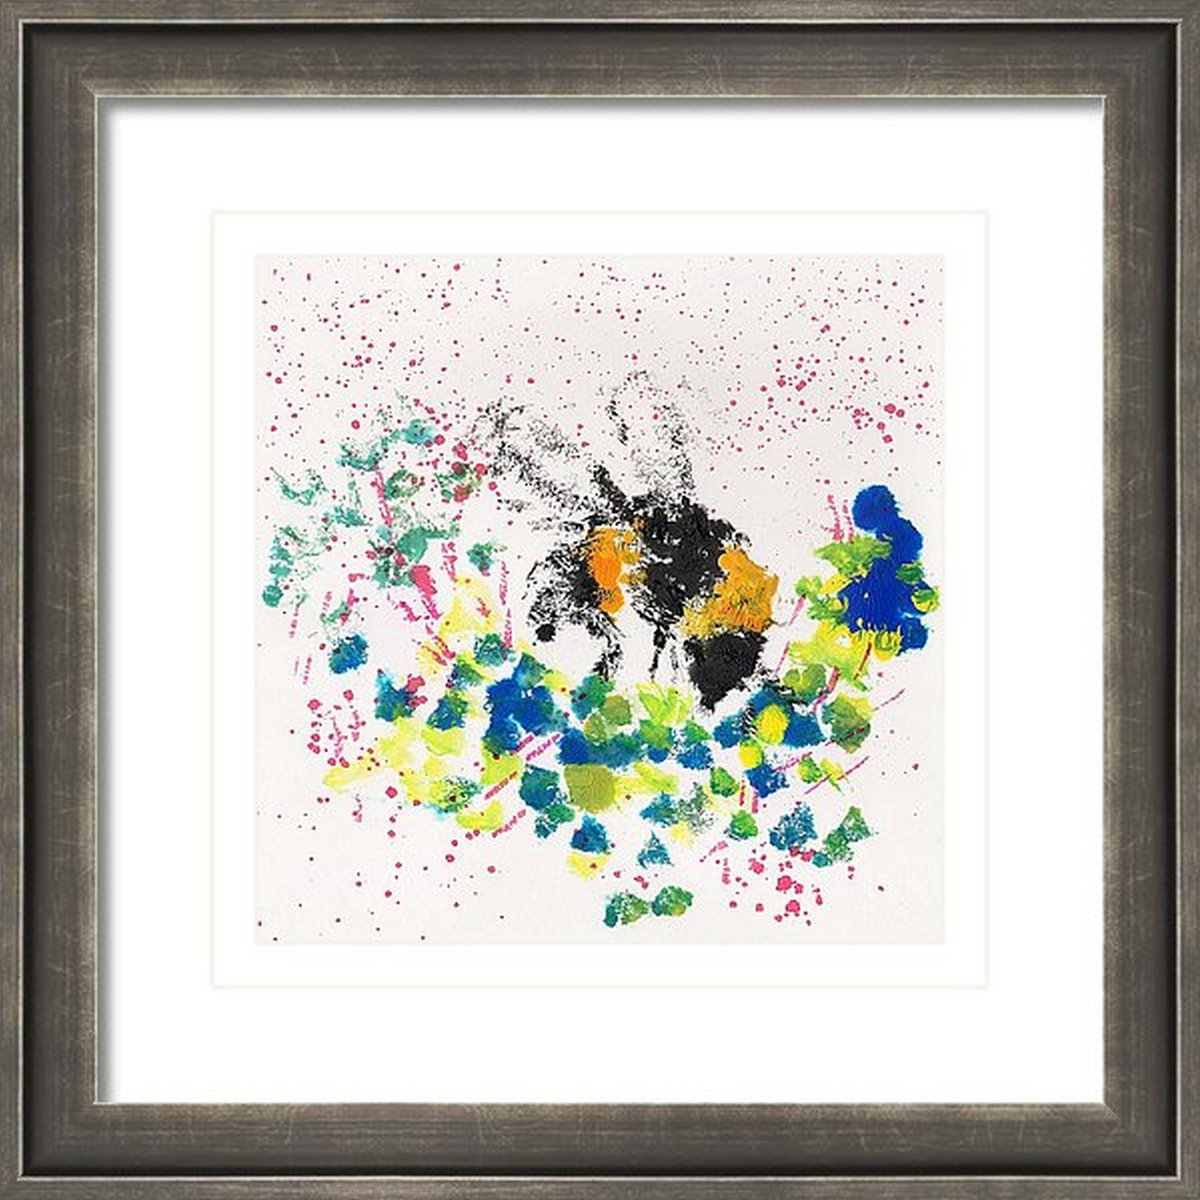 Honey Bee Bumblebee art - To Bee or not to be Mixed media on paper 8.25x 7.8 by Asha Shenoy